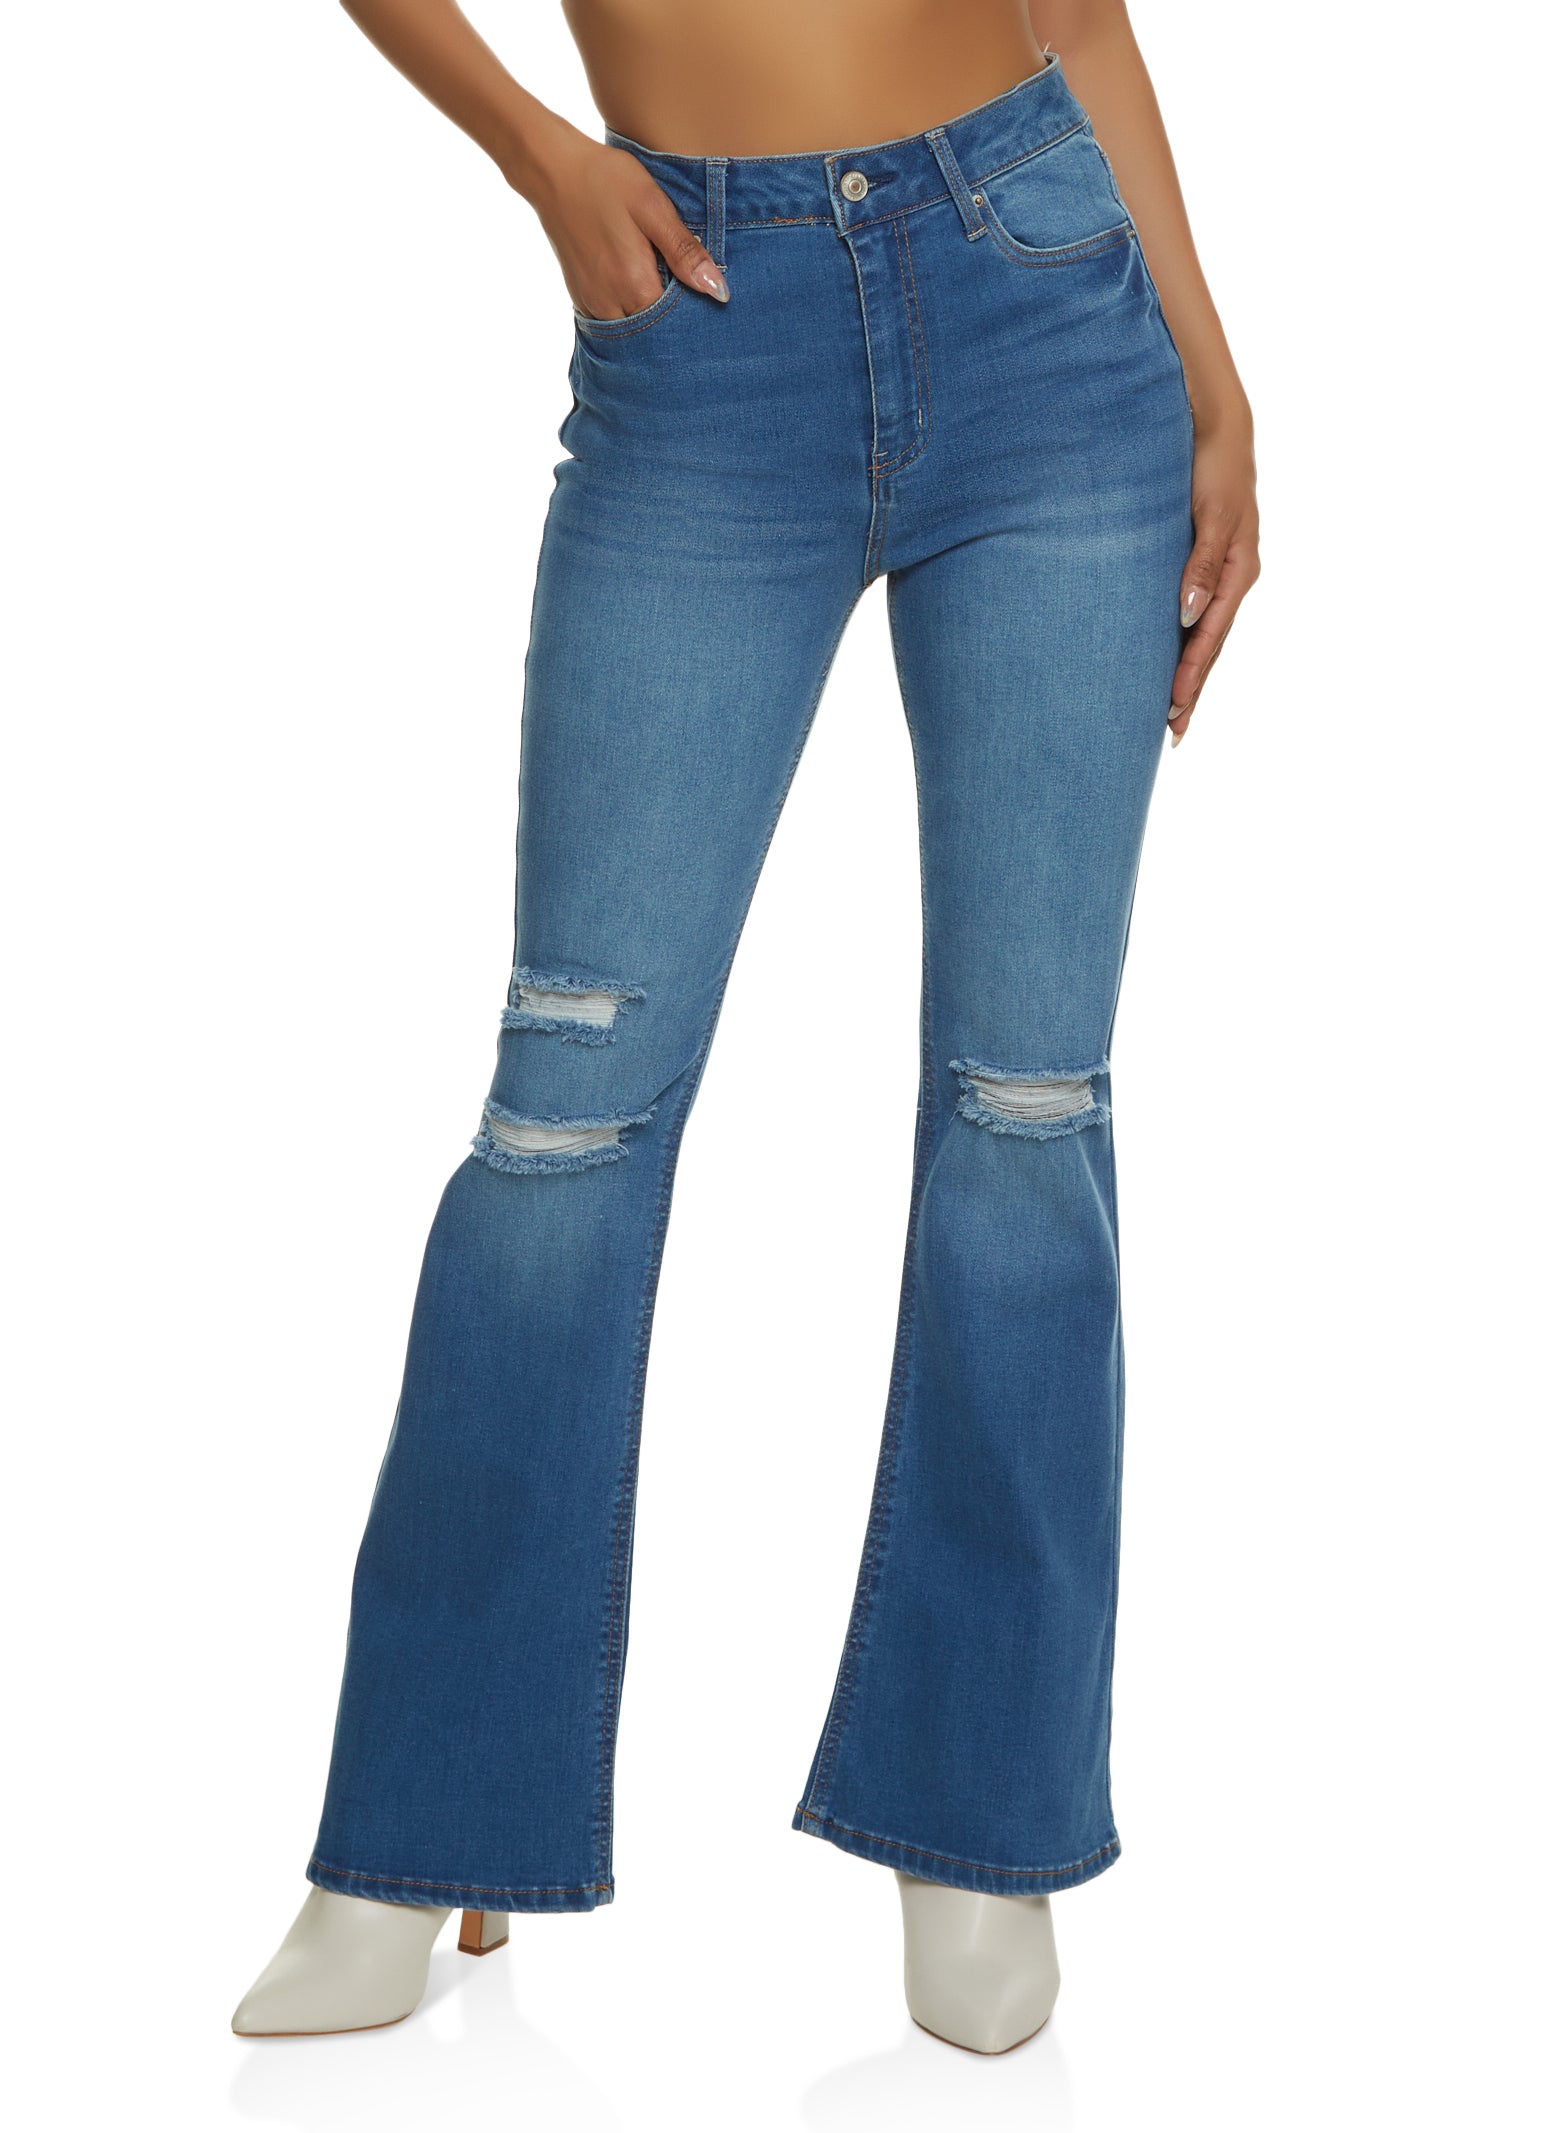 WAX Whiskered Flare Jeans